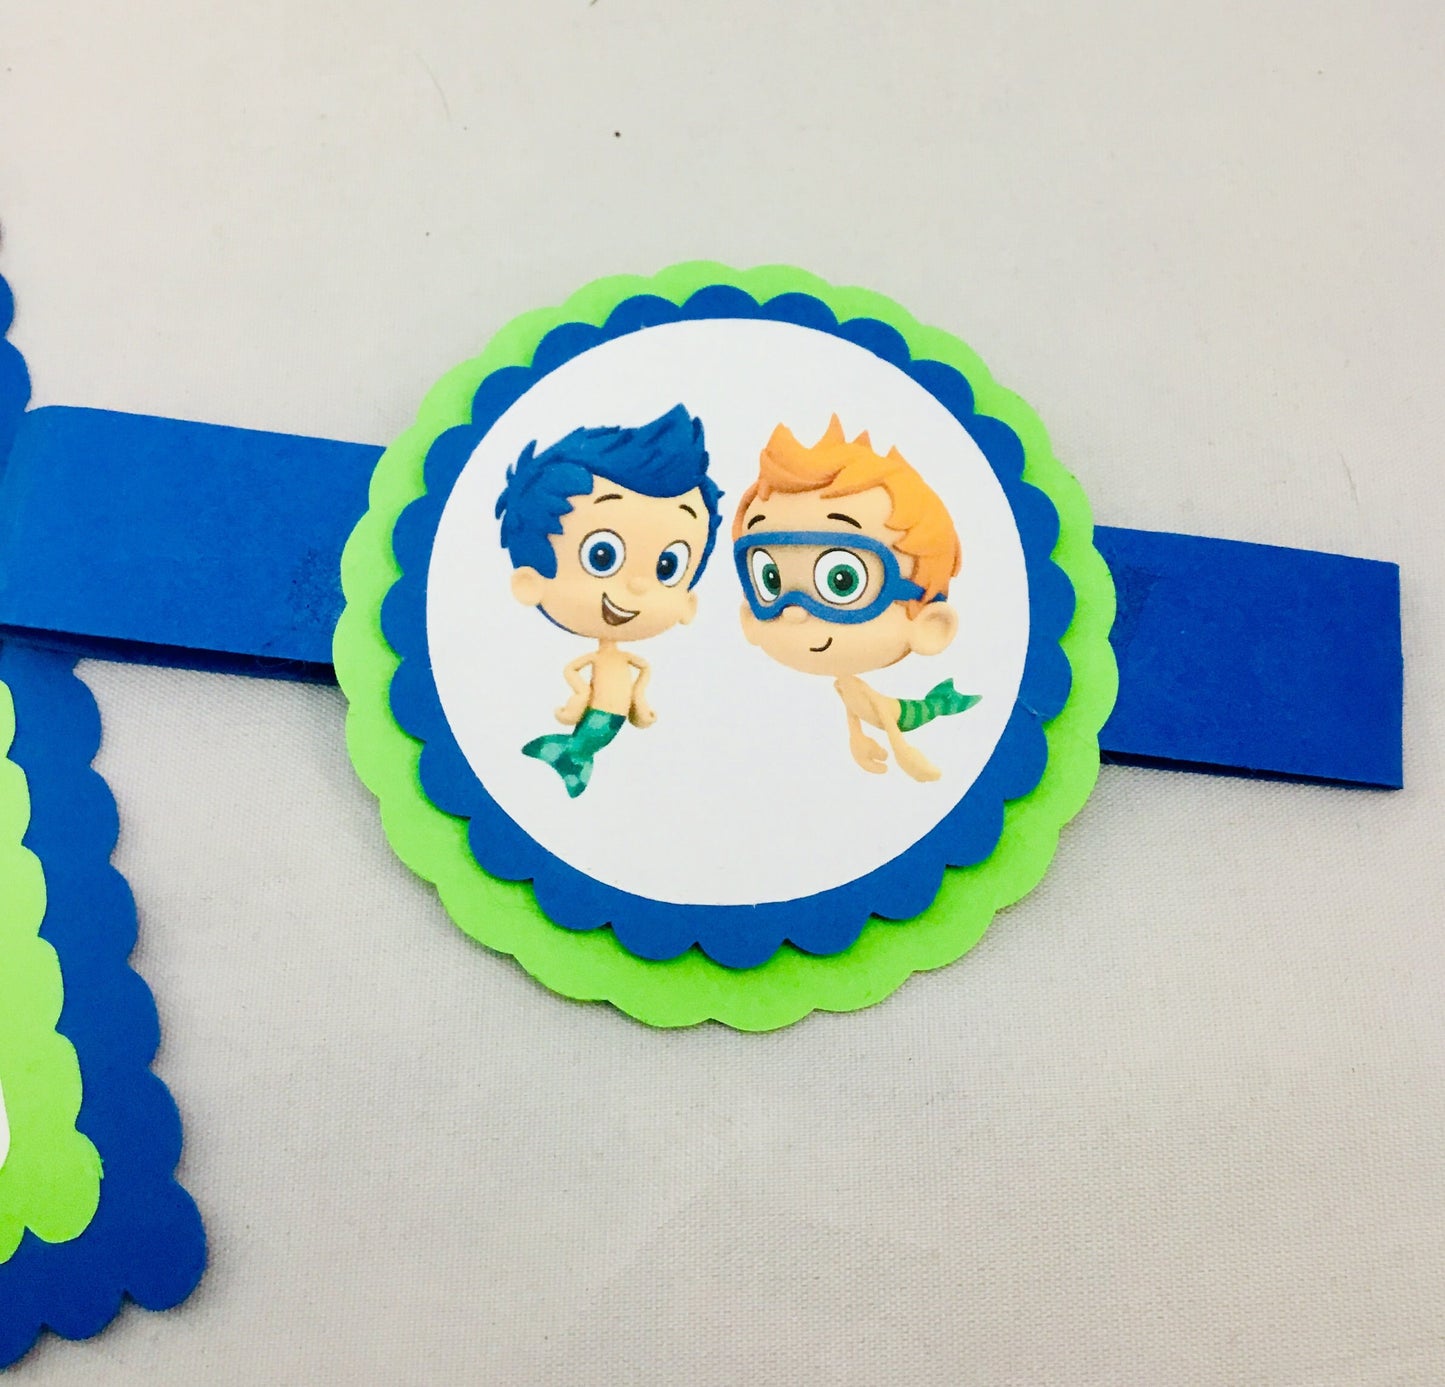 Bubble Guppies Invitation/Customized/ Set of 10 envelopes included/Bubble Guppies Birthday Party